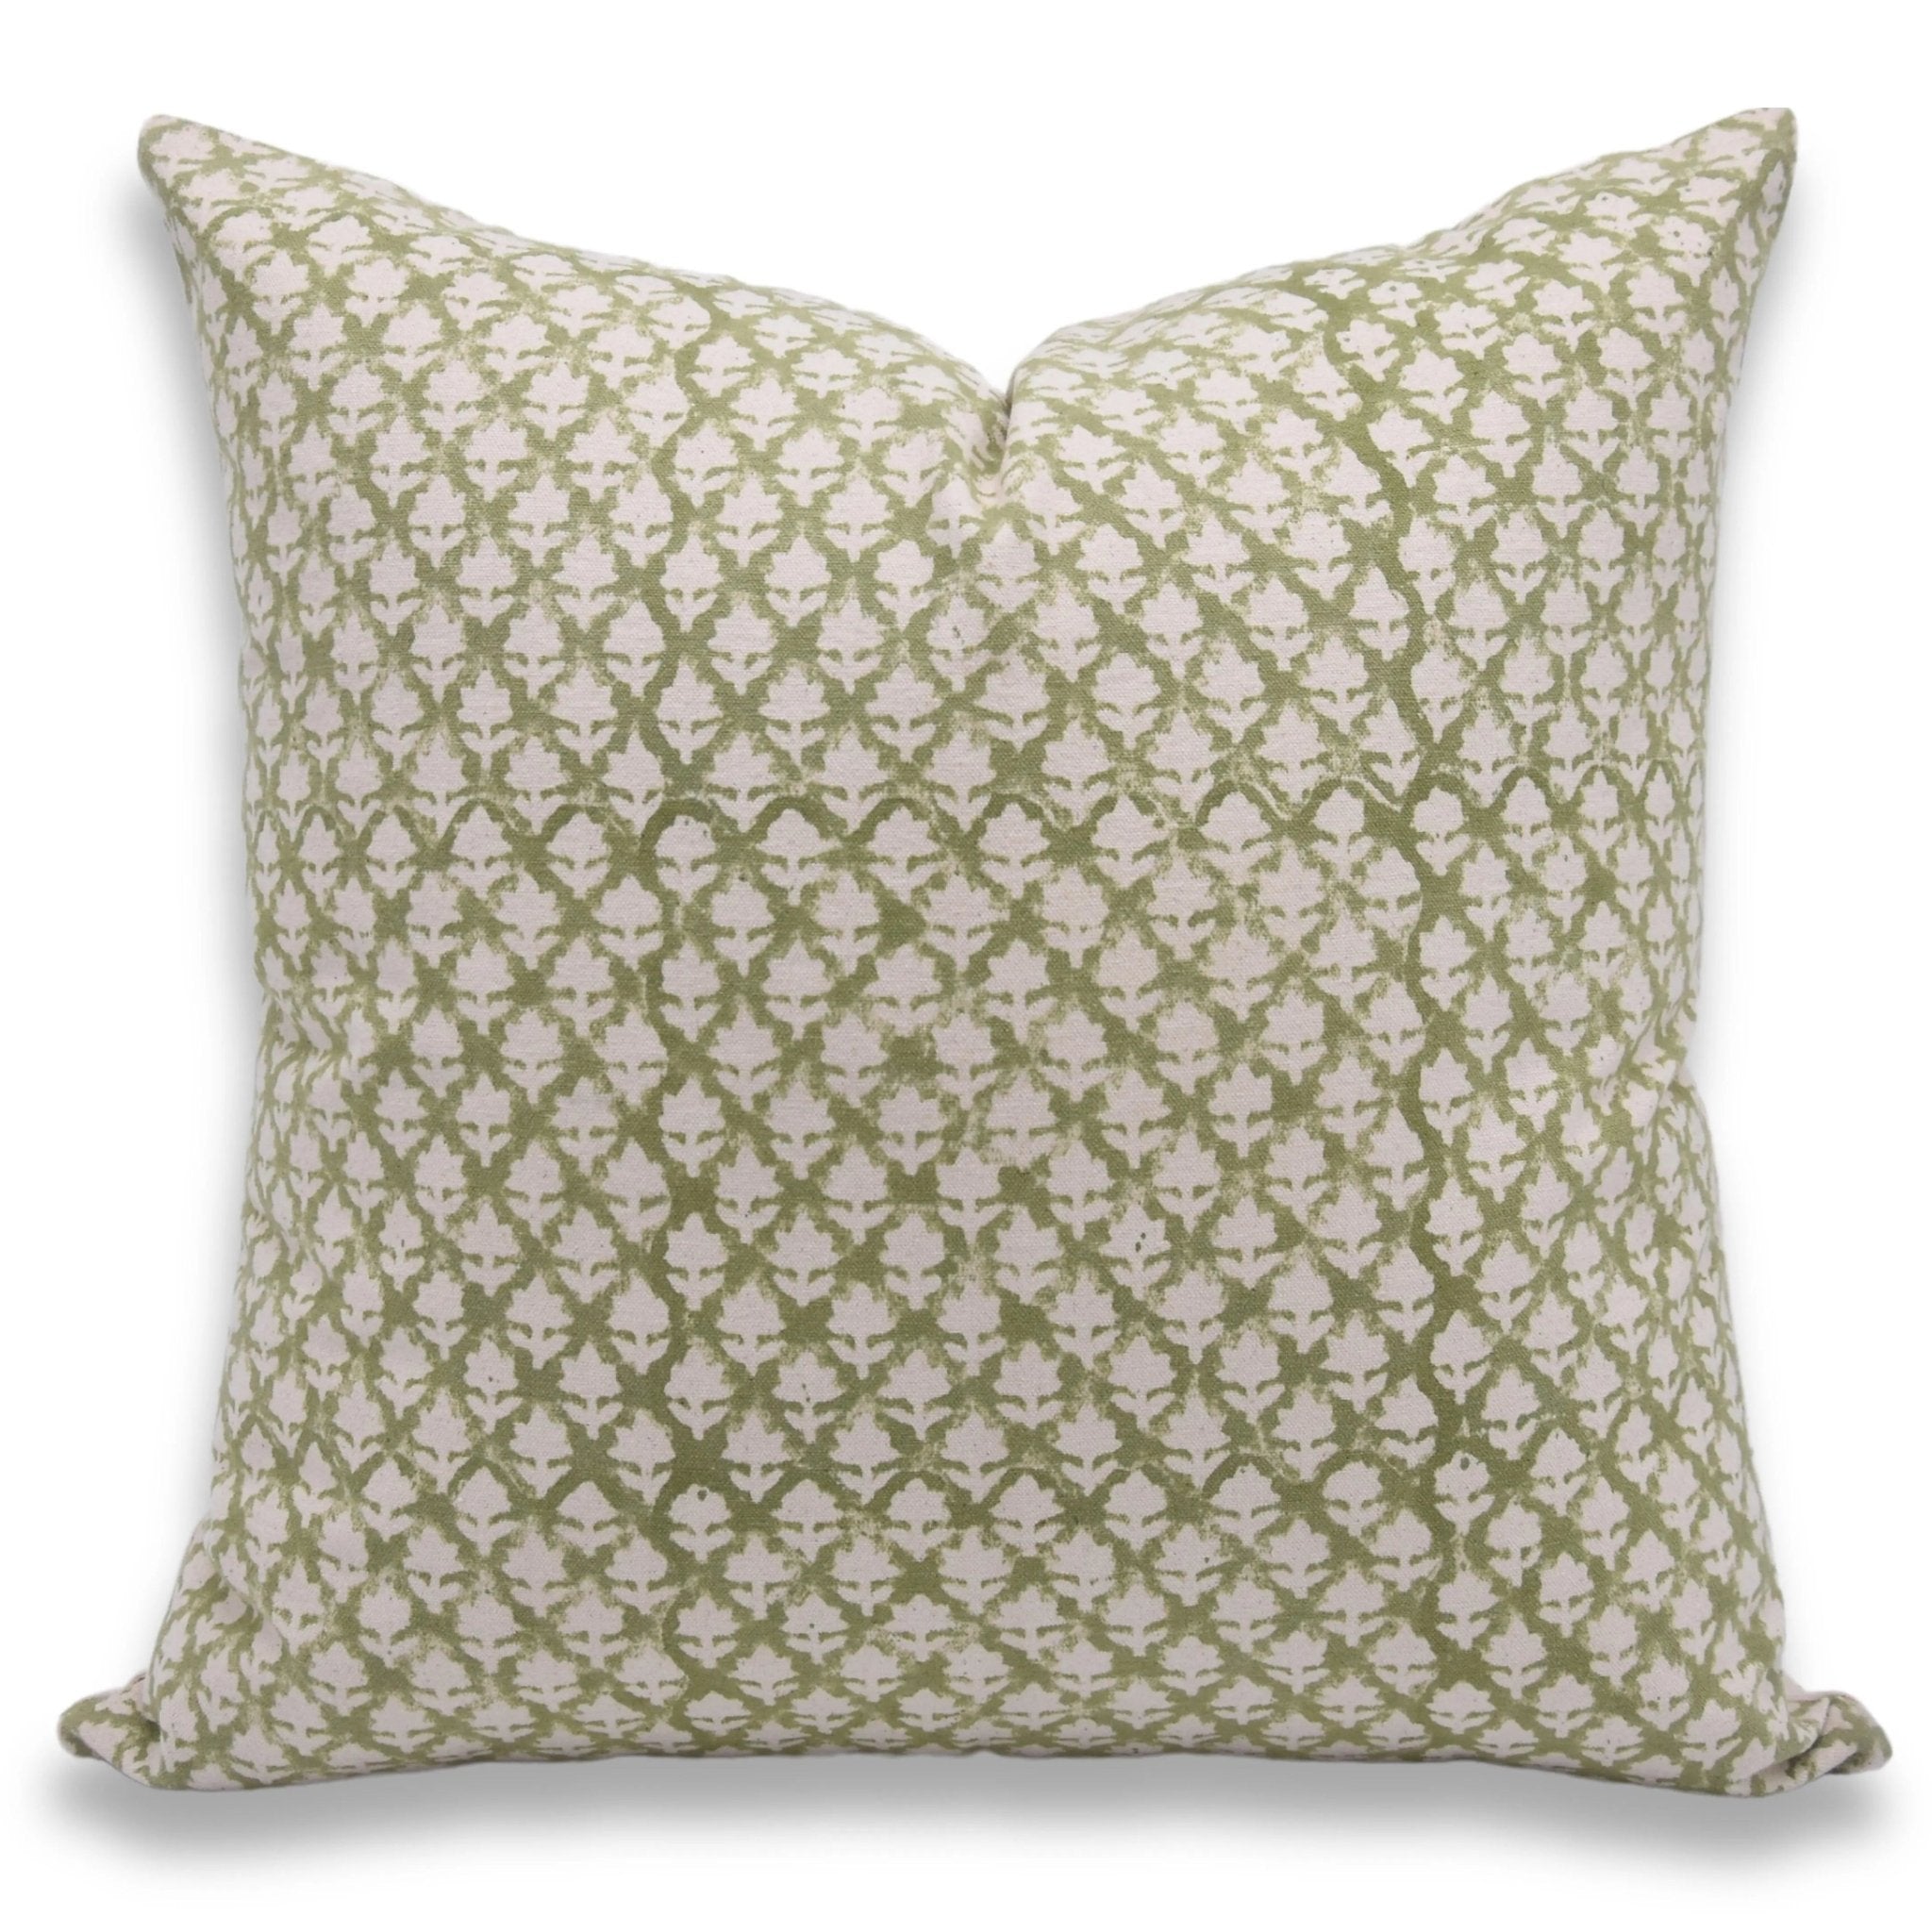 PINKCITY JAAL PILLOW COVER - FABDIVINE LLCPINKCITY JAAL PILLOW COVERTC Pillow CoverFABDIVINE LLC